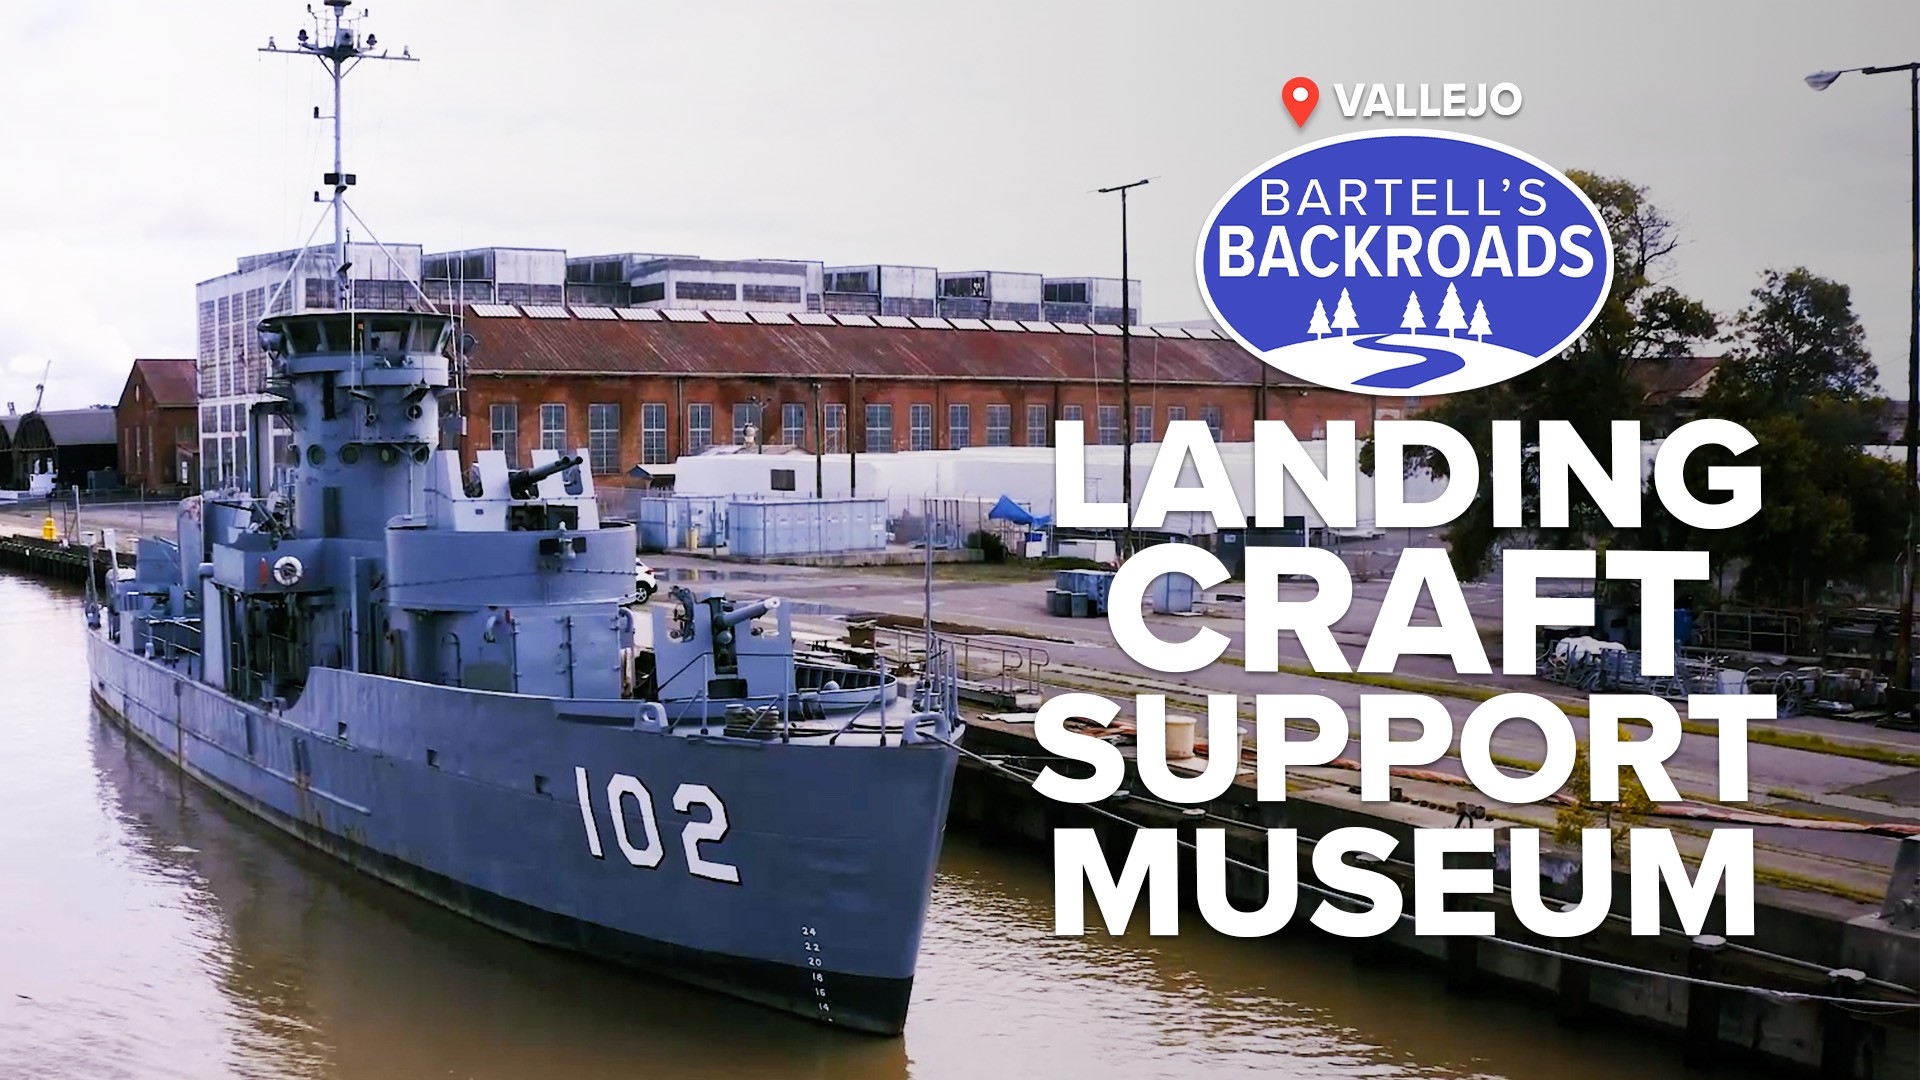 When WWII troops needed support for beach battles, these ships got the job done. Explore one at the Landing Craft Support Museum.